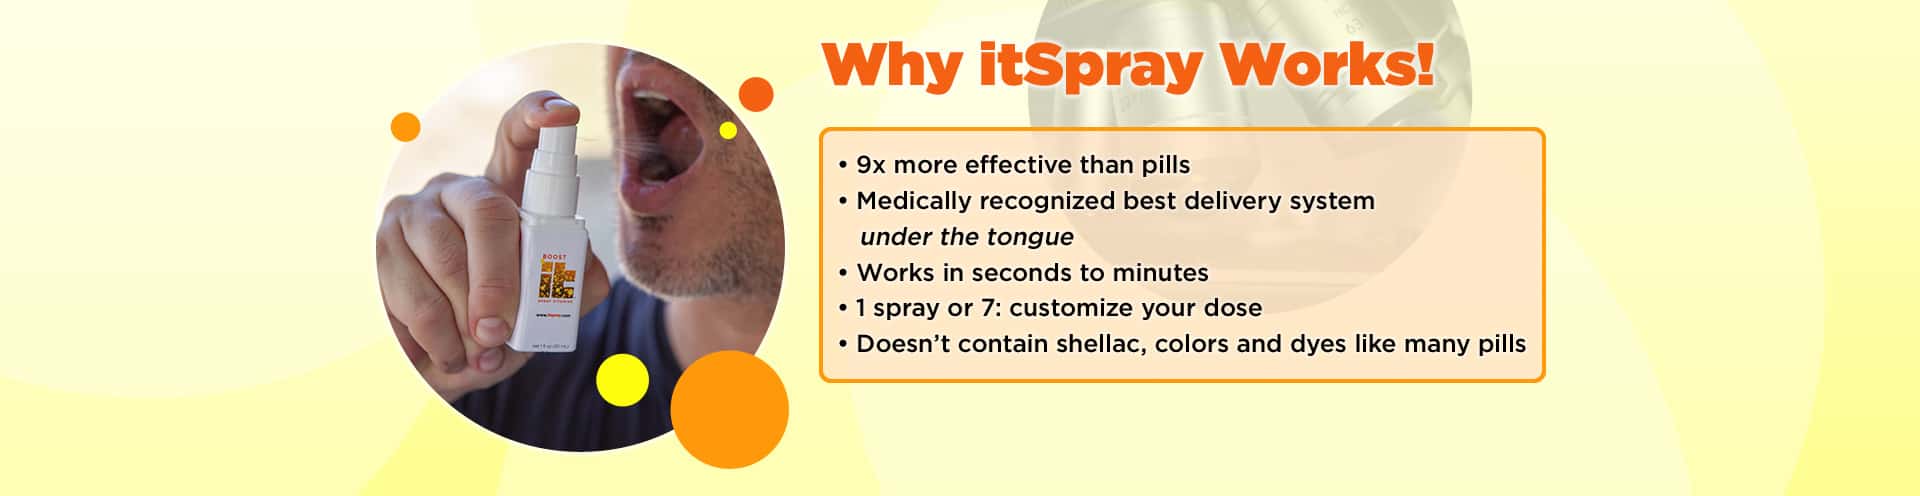 Why itSpray Works! 1) 9x more effective than pills. 2) Medically recognized best delivery system — under the tongue. 3) Works in seconds to minutes. 4) 1 spray or 7: customize your dose. 5) Doesn’t contain shellac, colors and dyes like many pills.